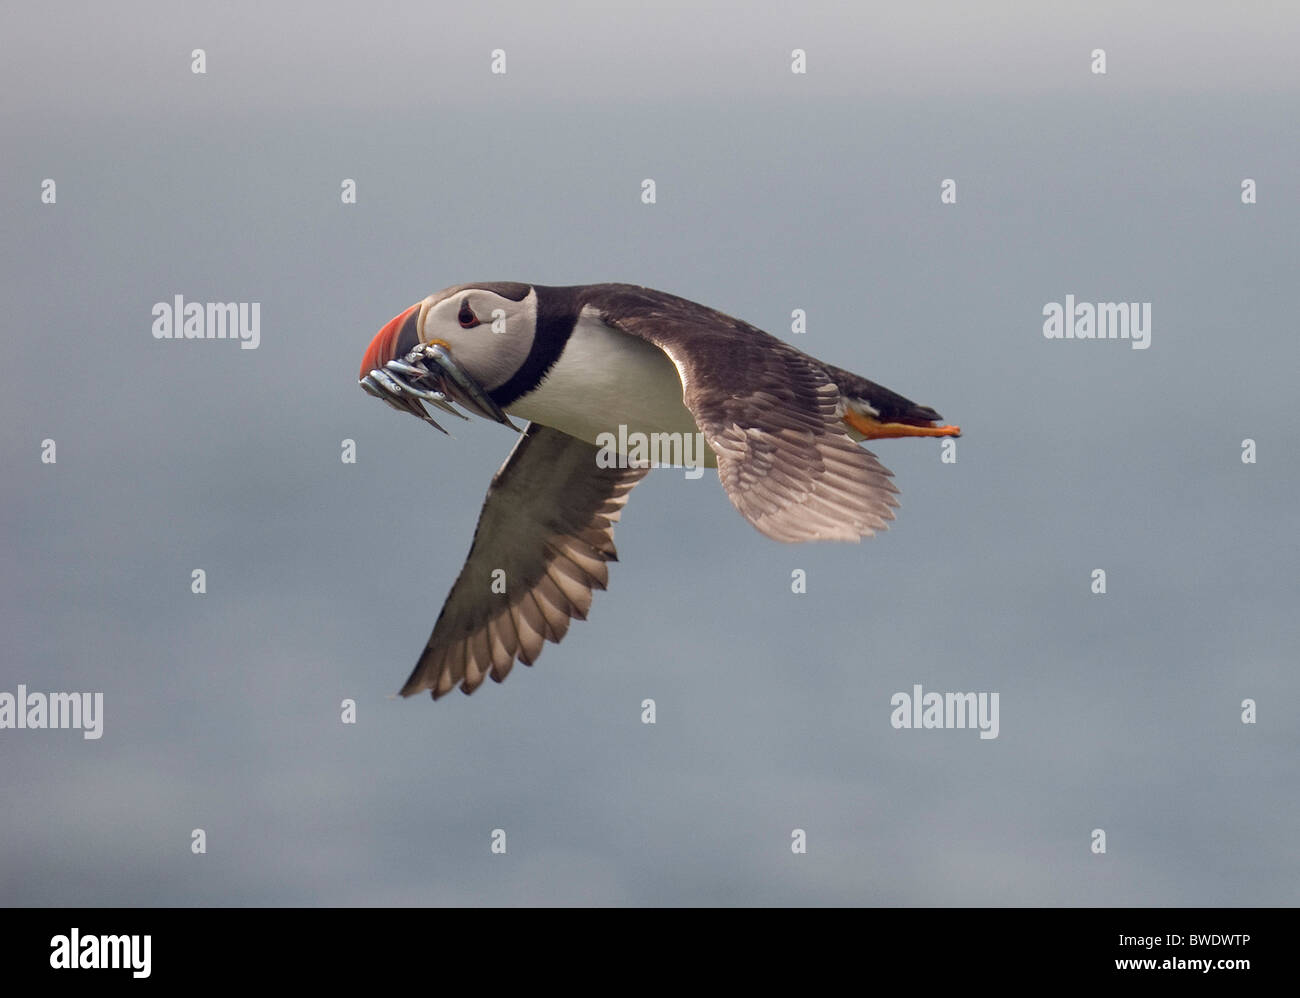 Puffin flying with sand eels in beak Farne Islands Northumberland Fratecula arctica in flight Stock Photo